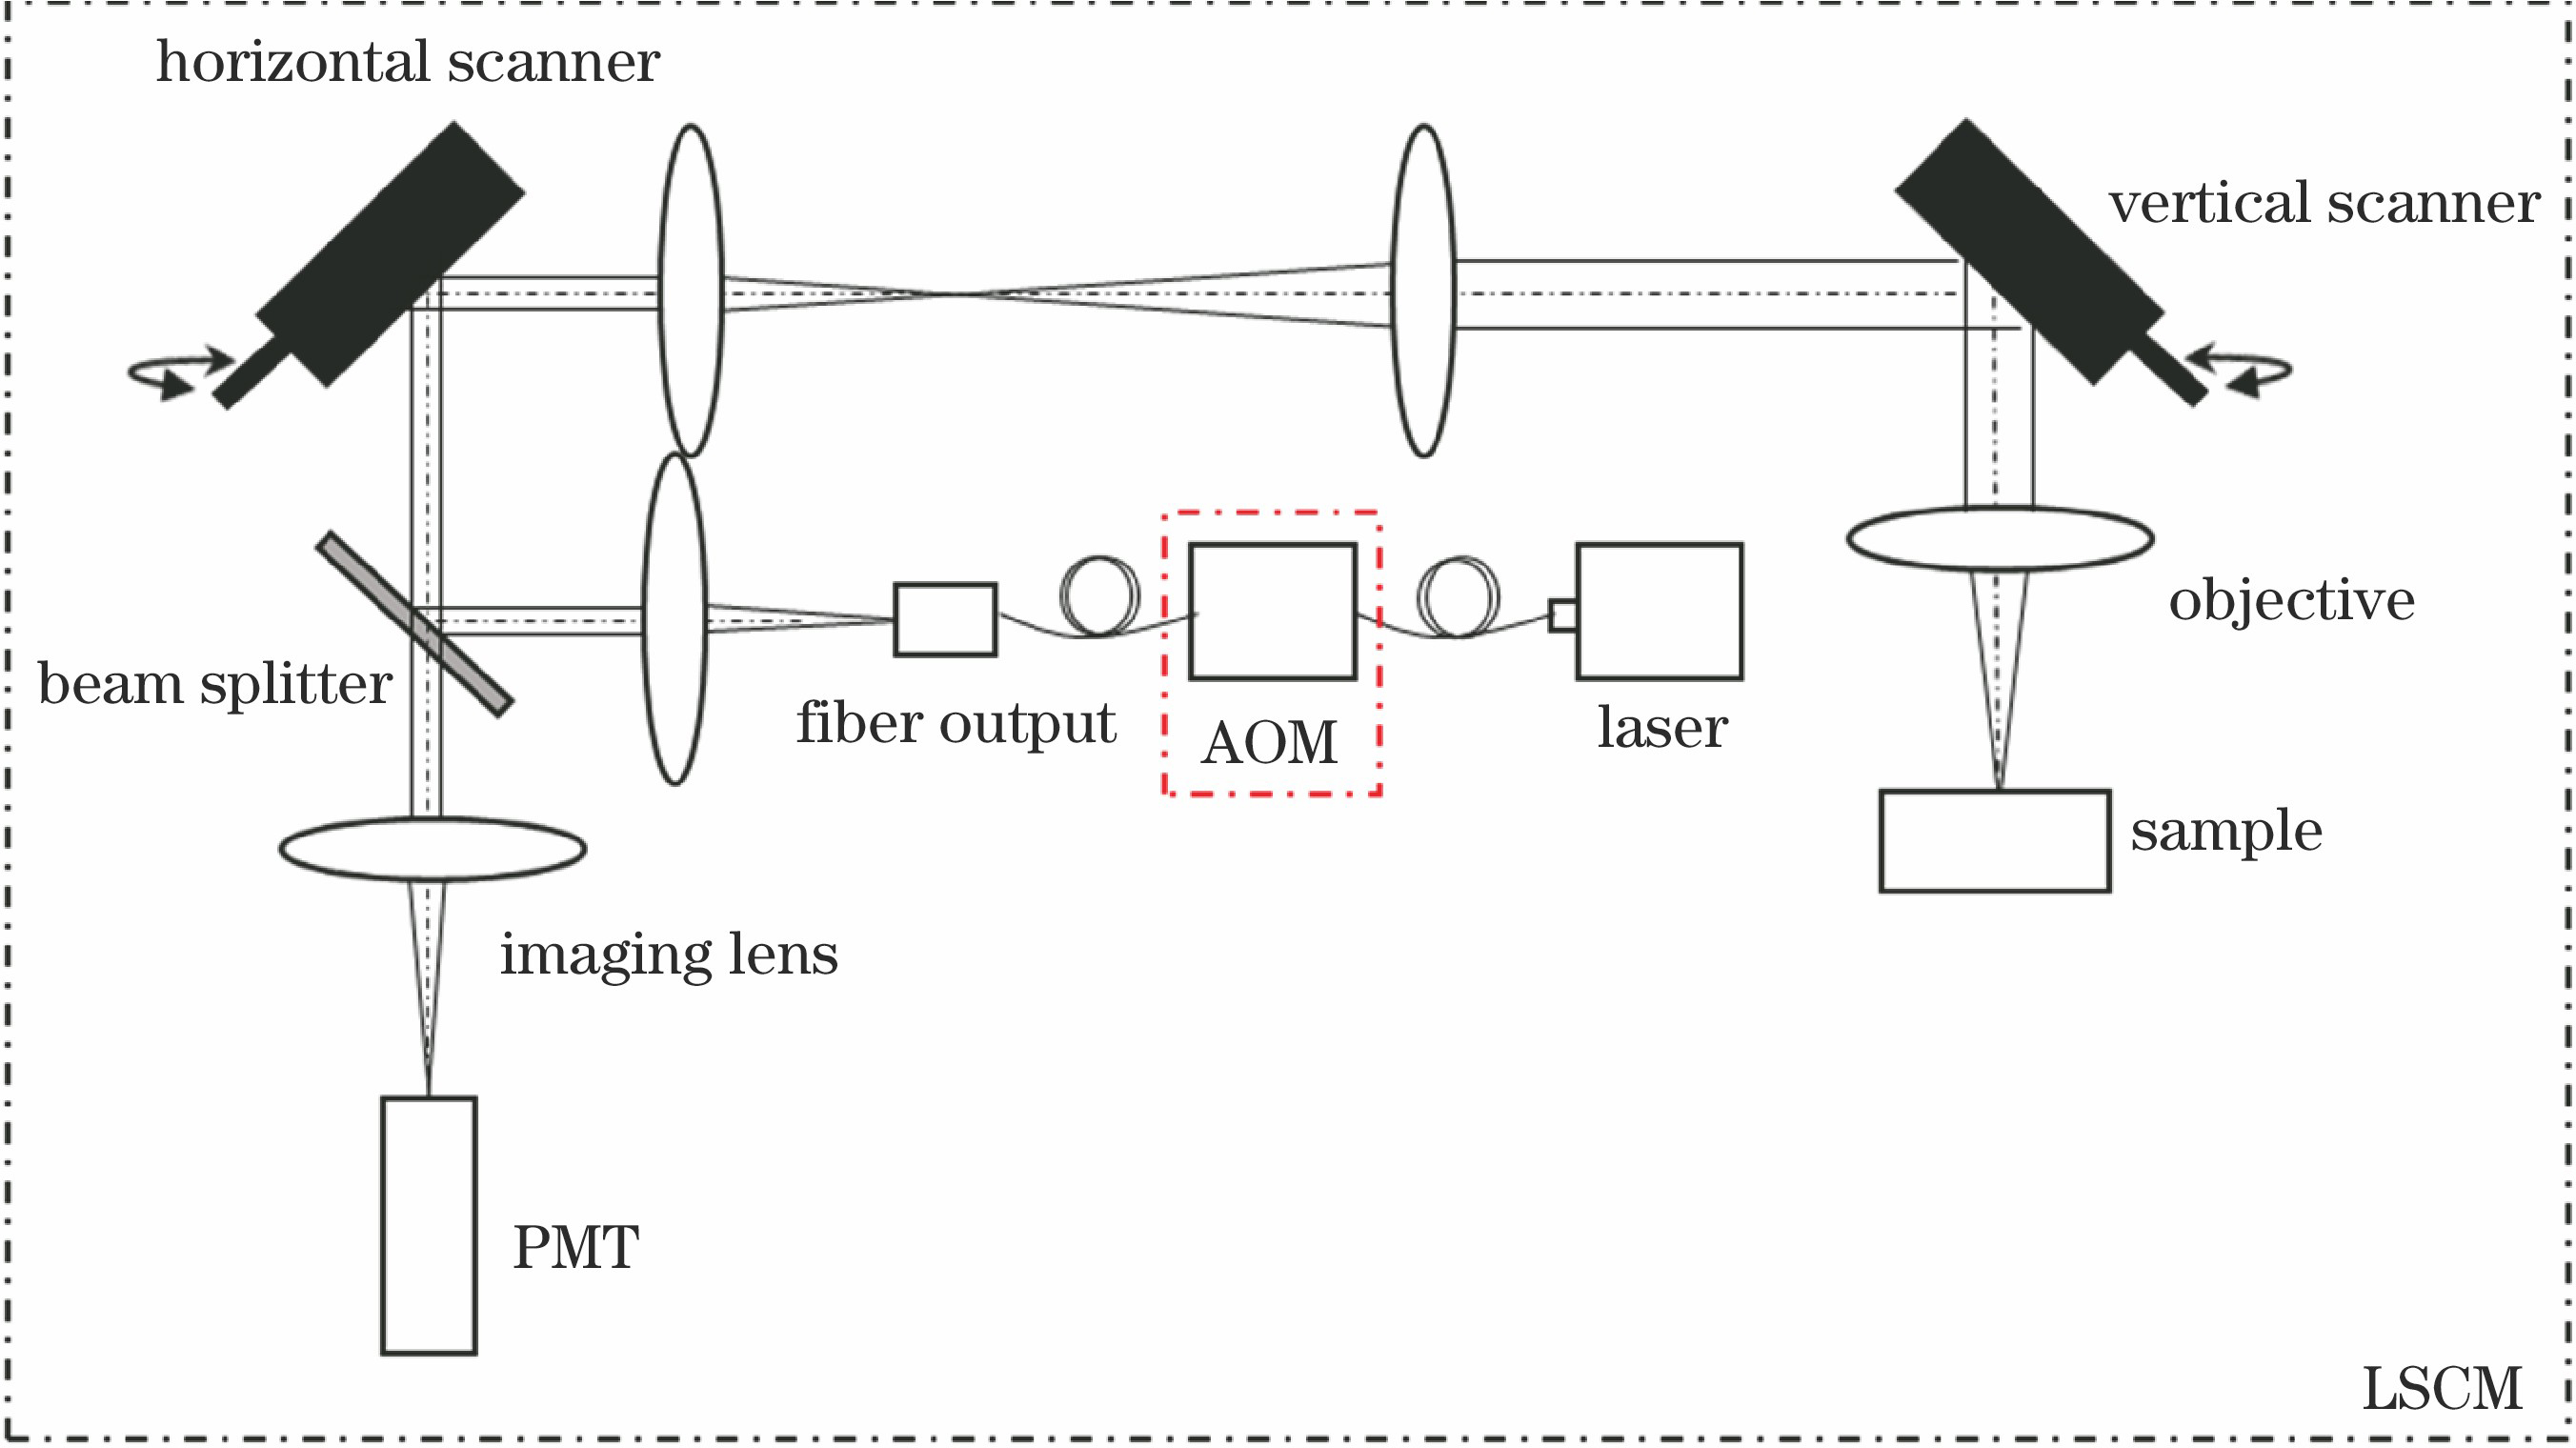 Optical path of coaxial scanning real-time light stimulus system